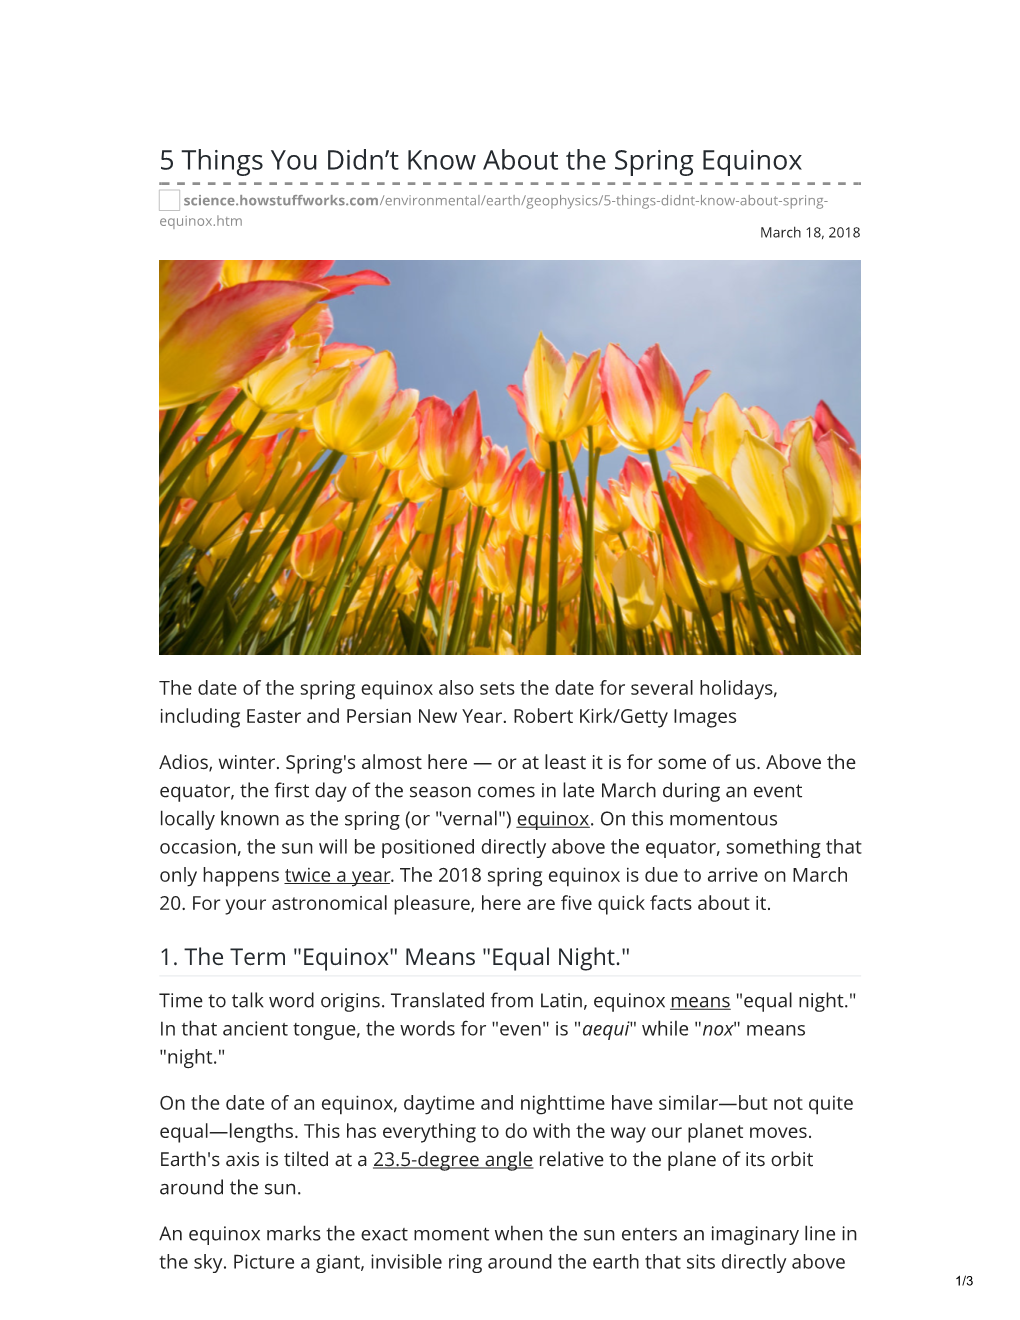 5 Things You Didn't Know About the Spring Equinox